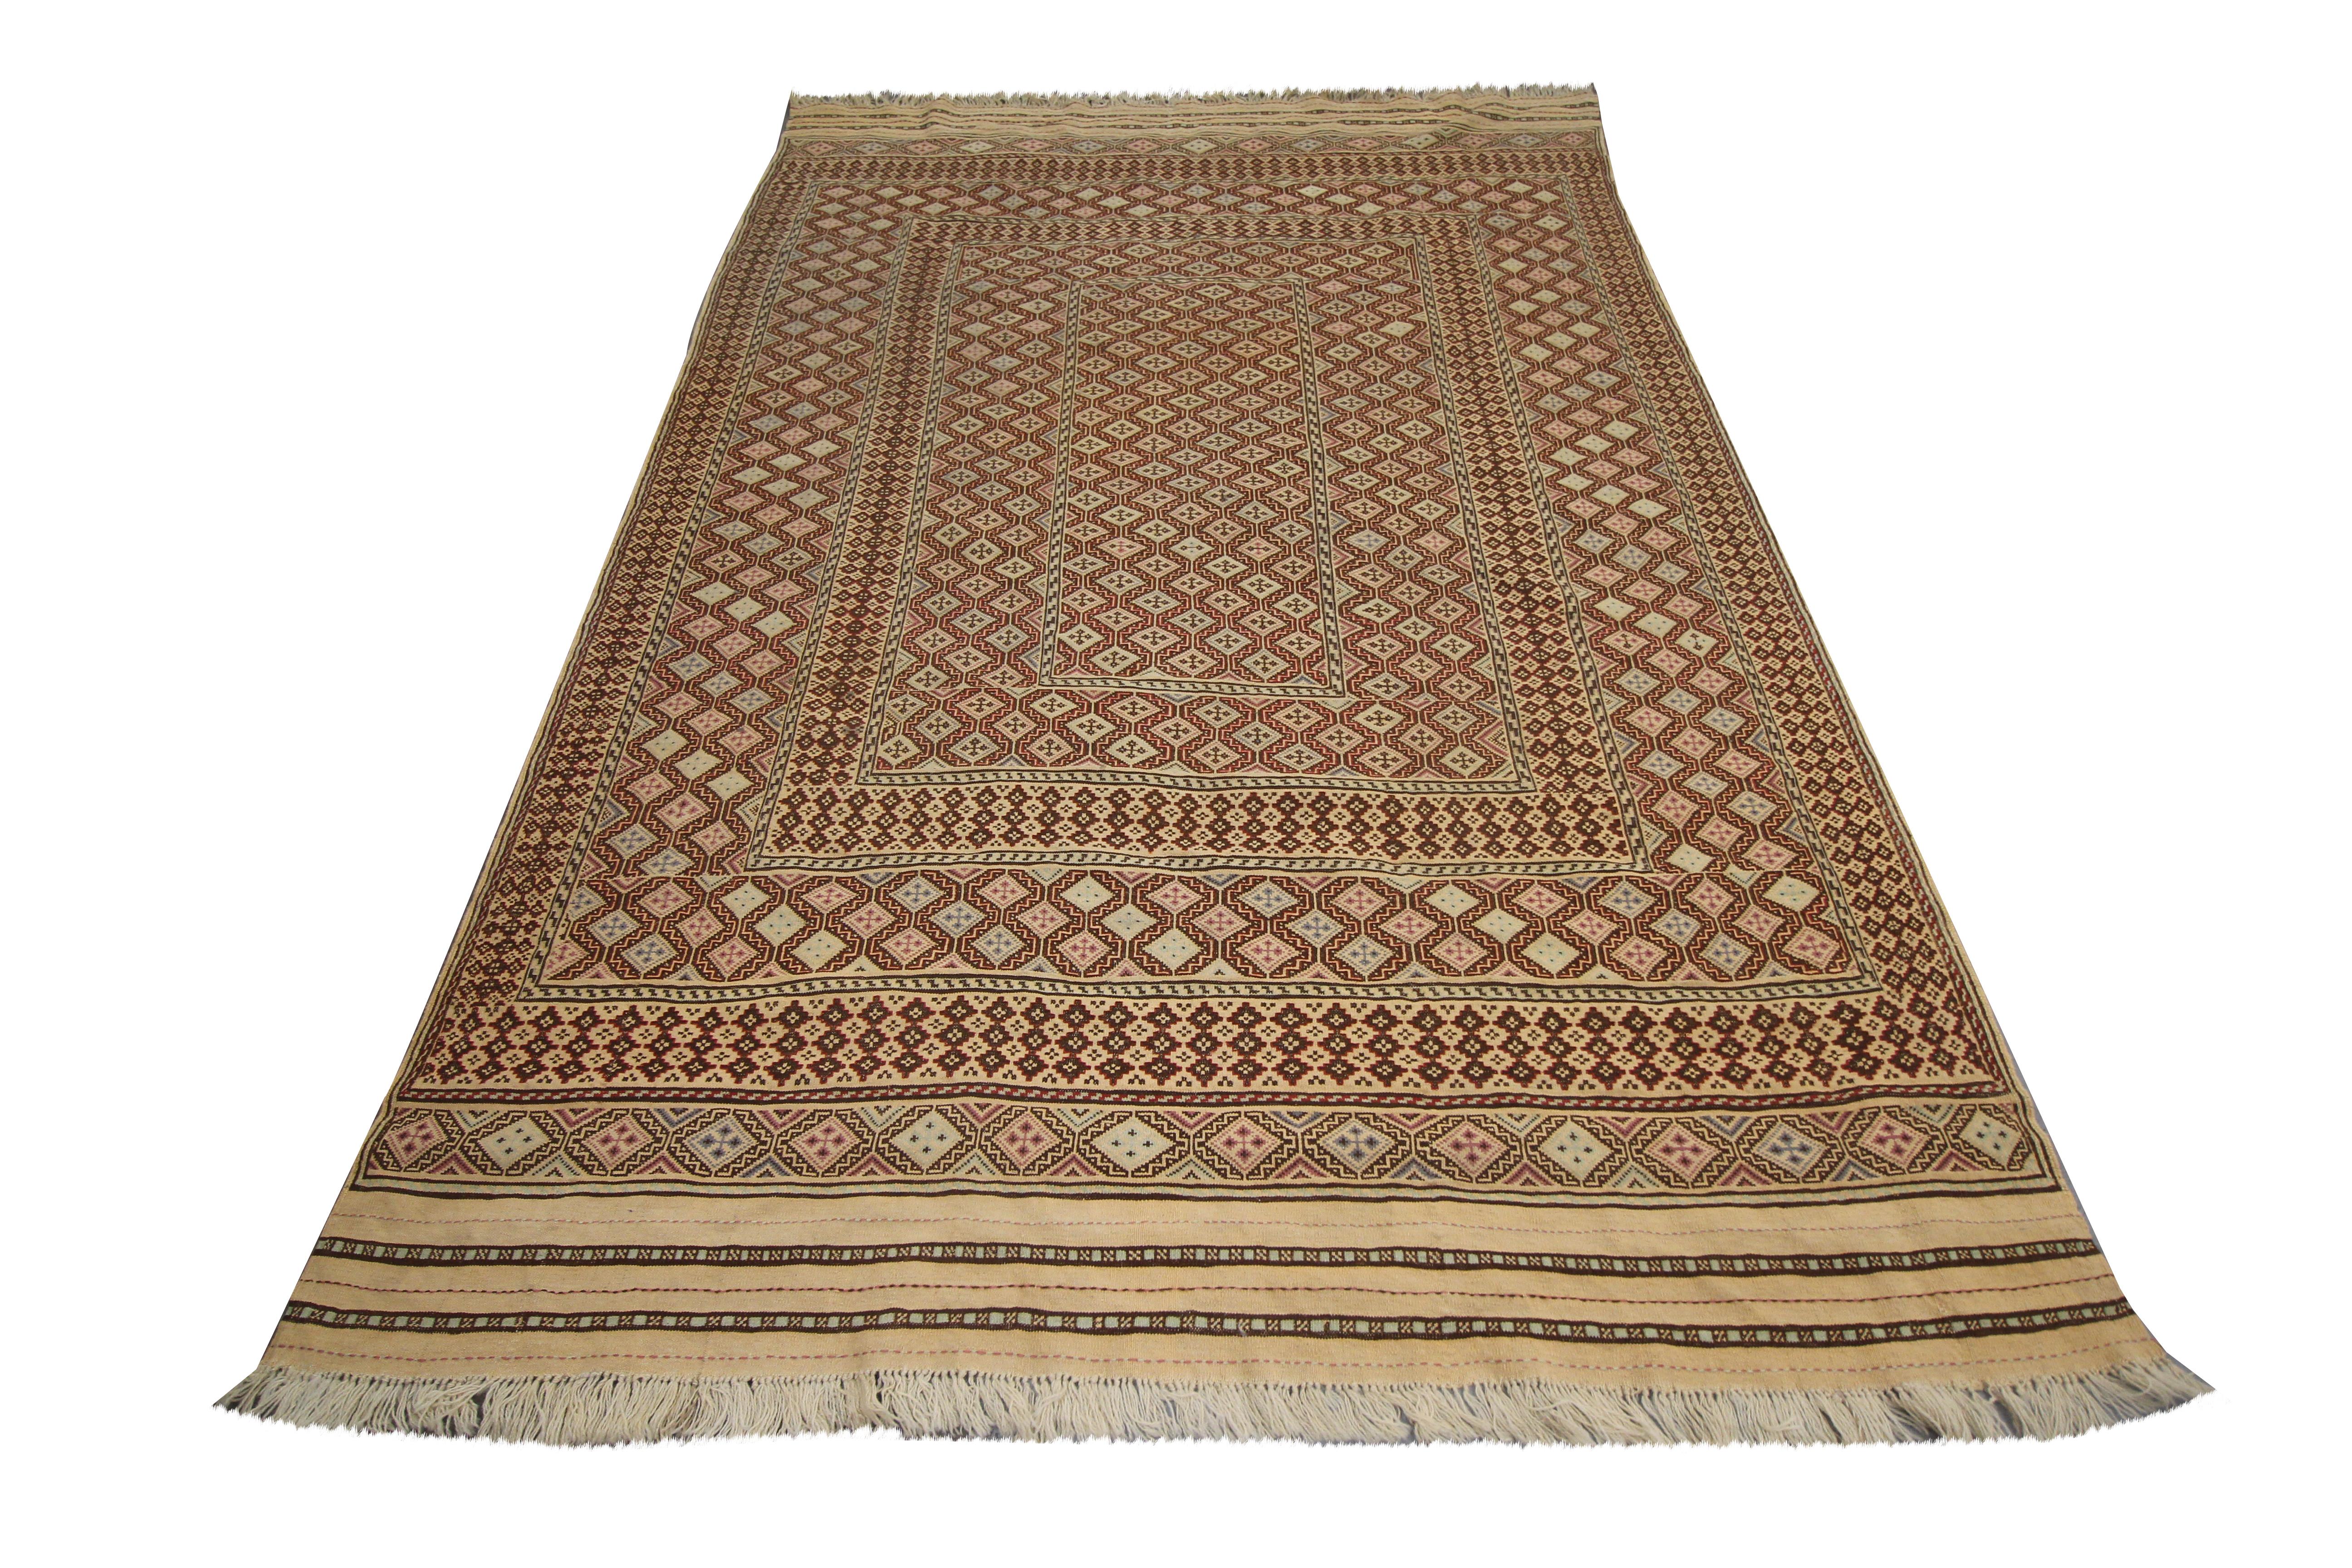 This old wool area rug is a handwoven Afghan Soumach kilim woven by hand in the 1930s. The design is intricate featuring a bold geometric design, symmetrically woven with diamond tribal motifs. The colour palette is rustic with a beige background